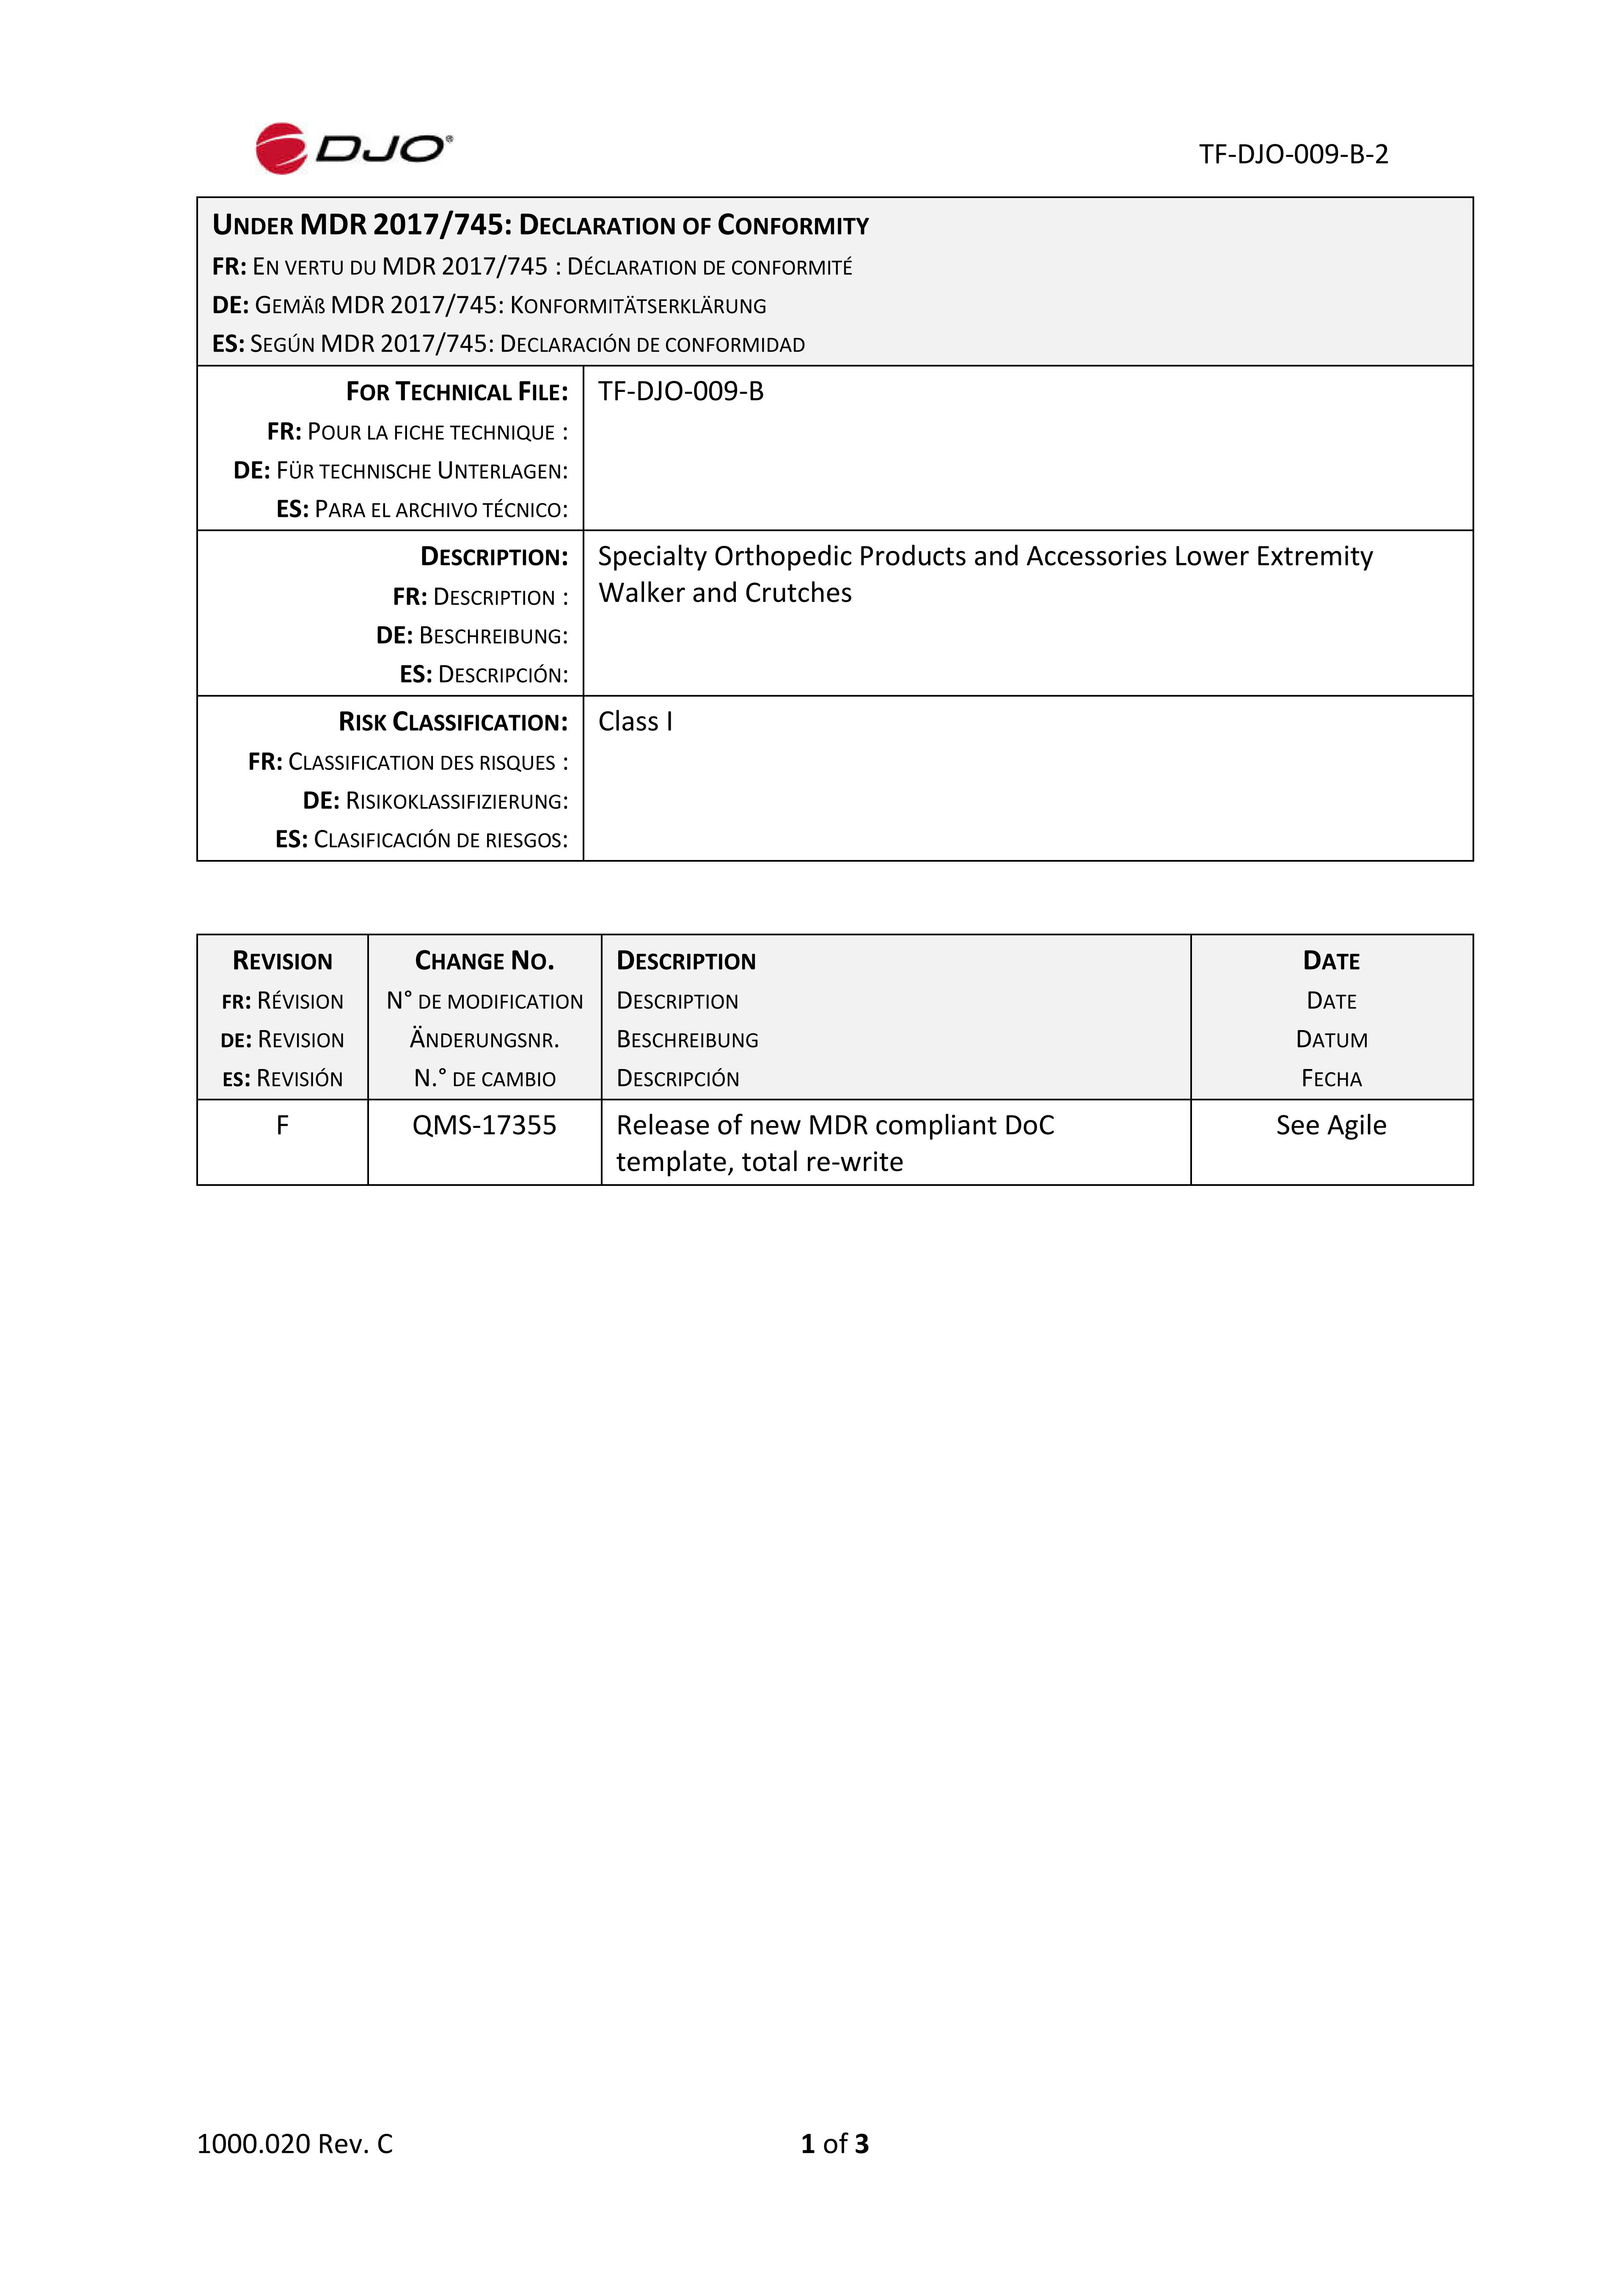 TF-DJO-009-B-2 _Specialty Orthopedic Products and Accessories DOC_Rev_F.pdf